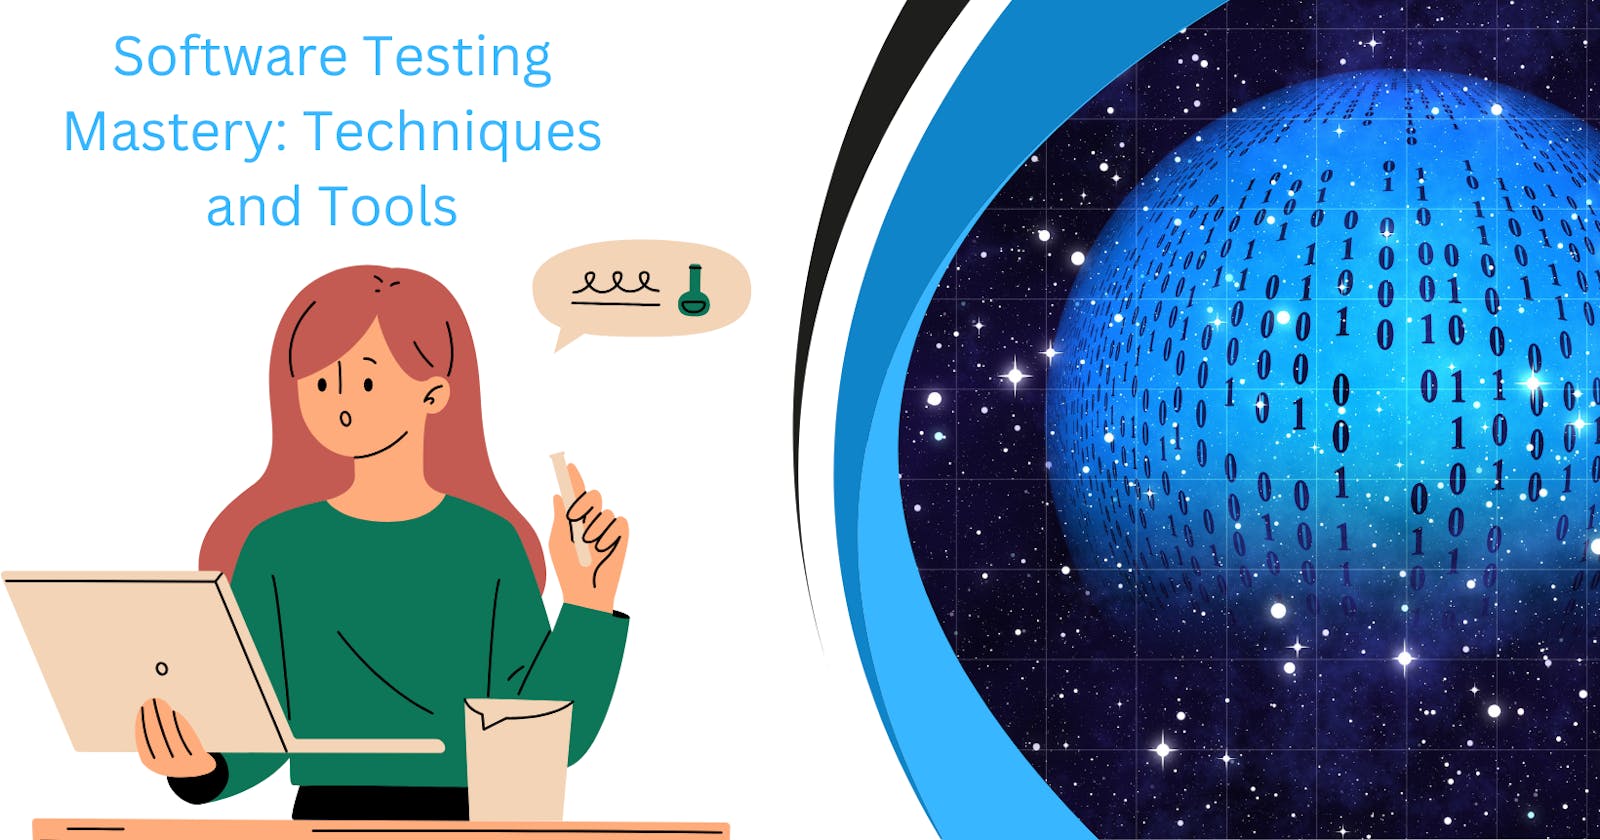 Software Testing Mastery: Techniques and Tools